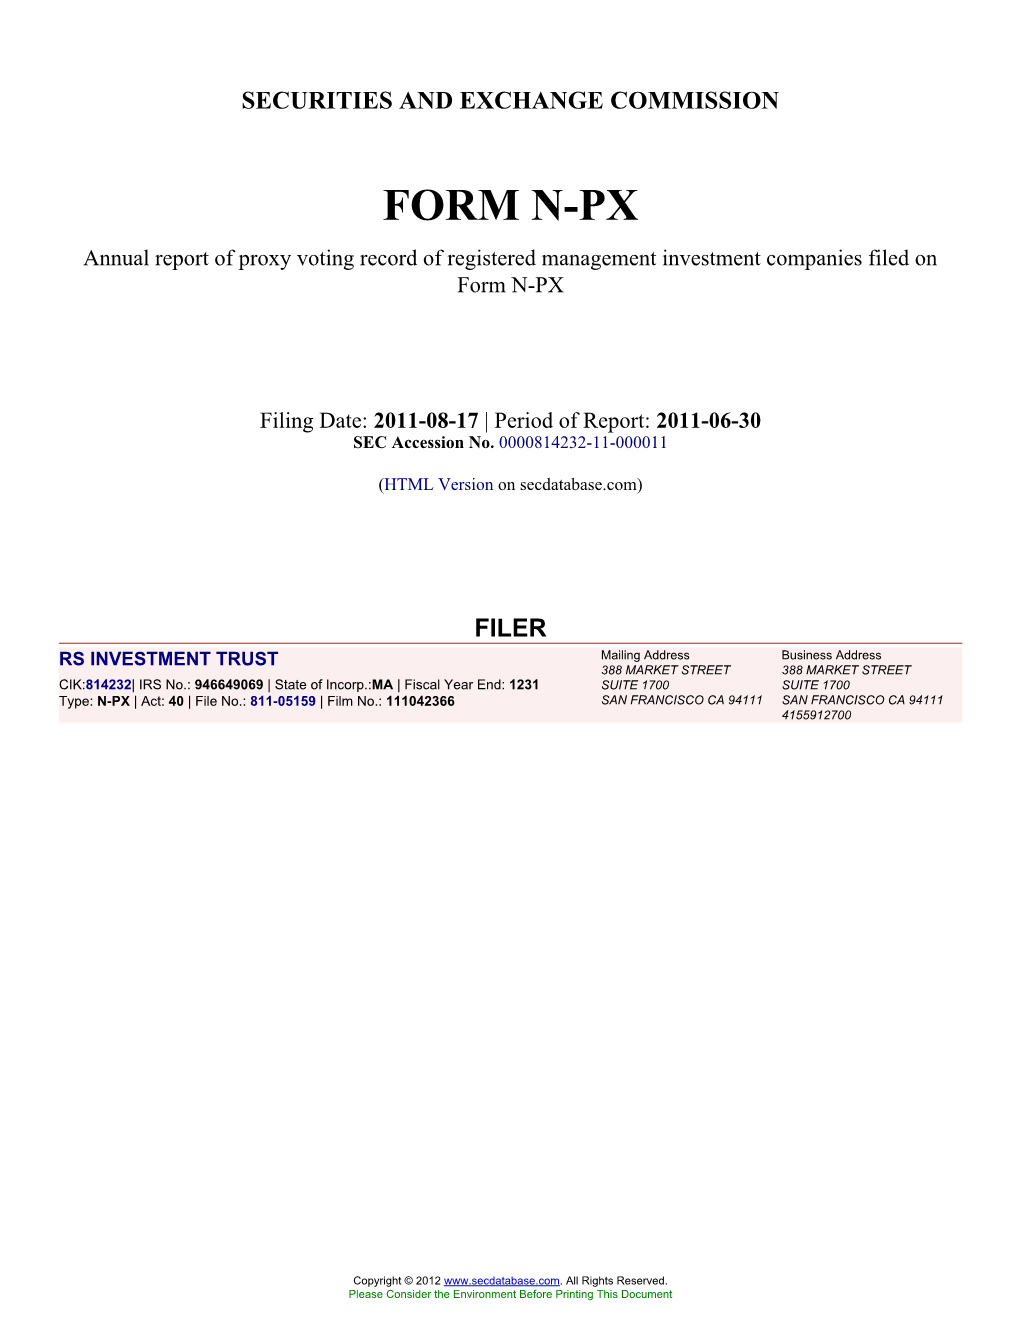 RS INVESTMENT TRUST (Form: N-PX, Filing Date: 08/17/2011)